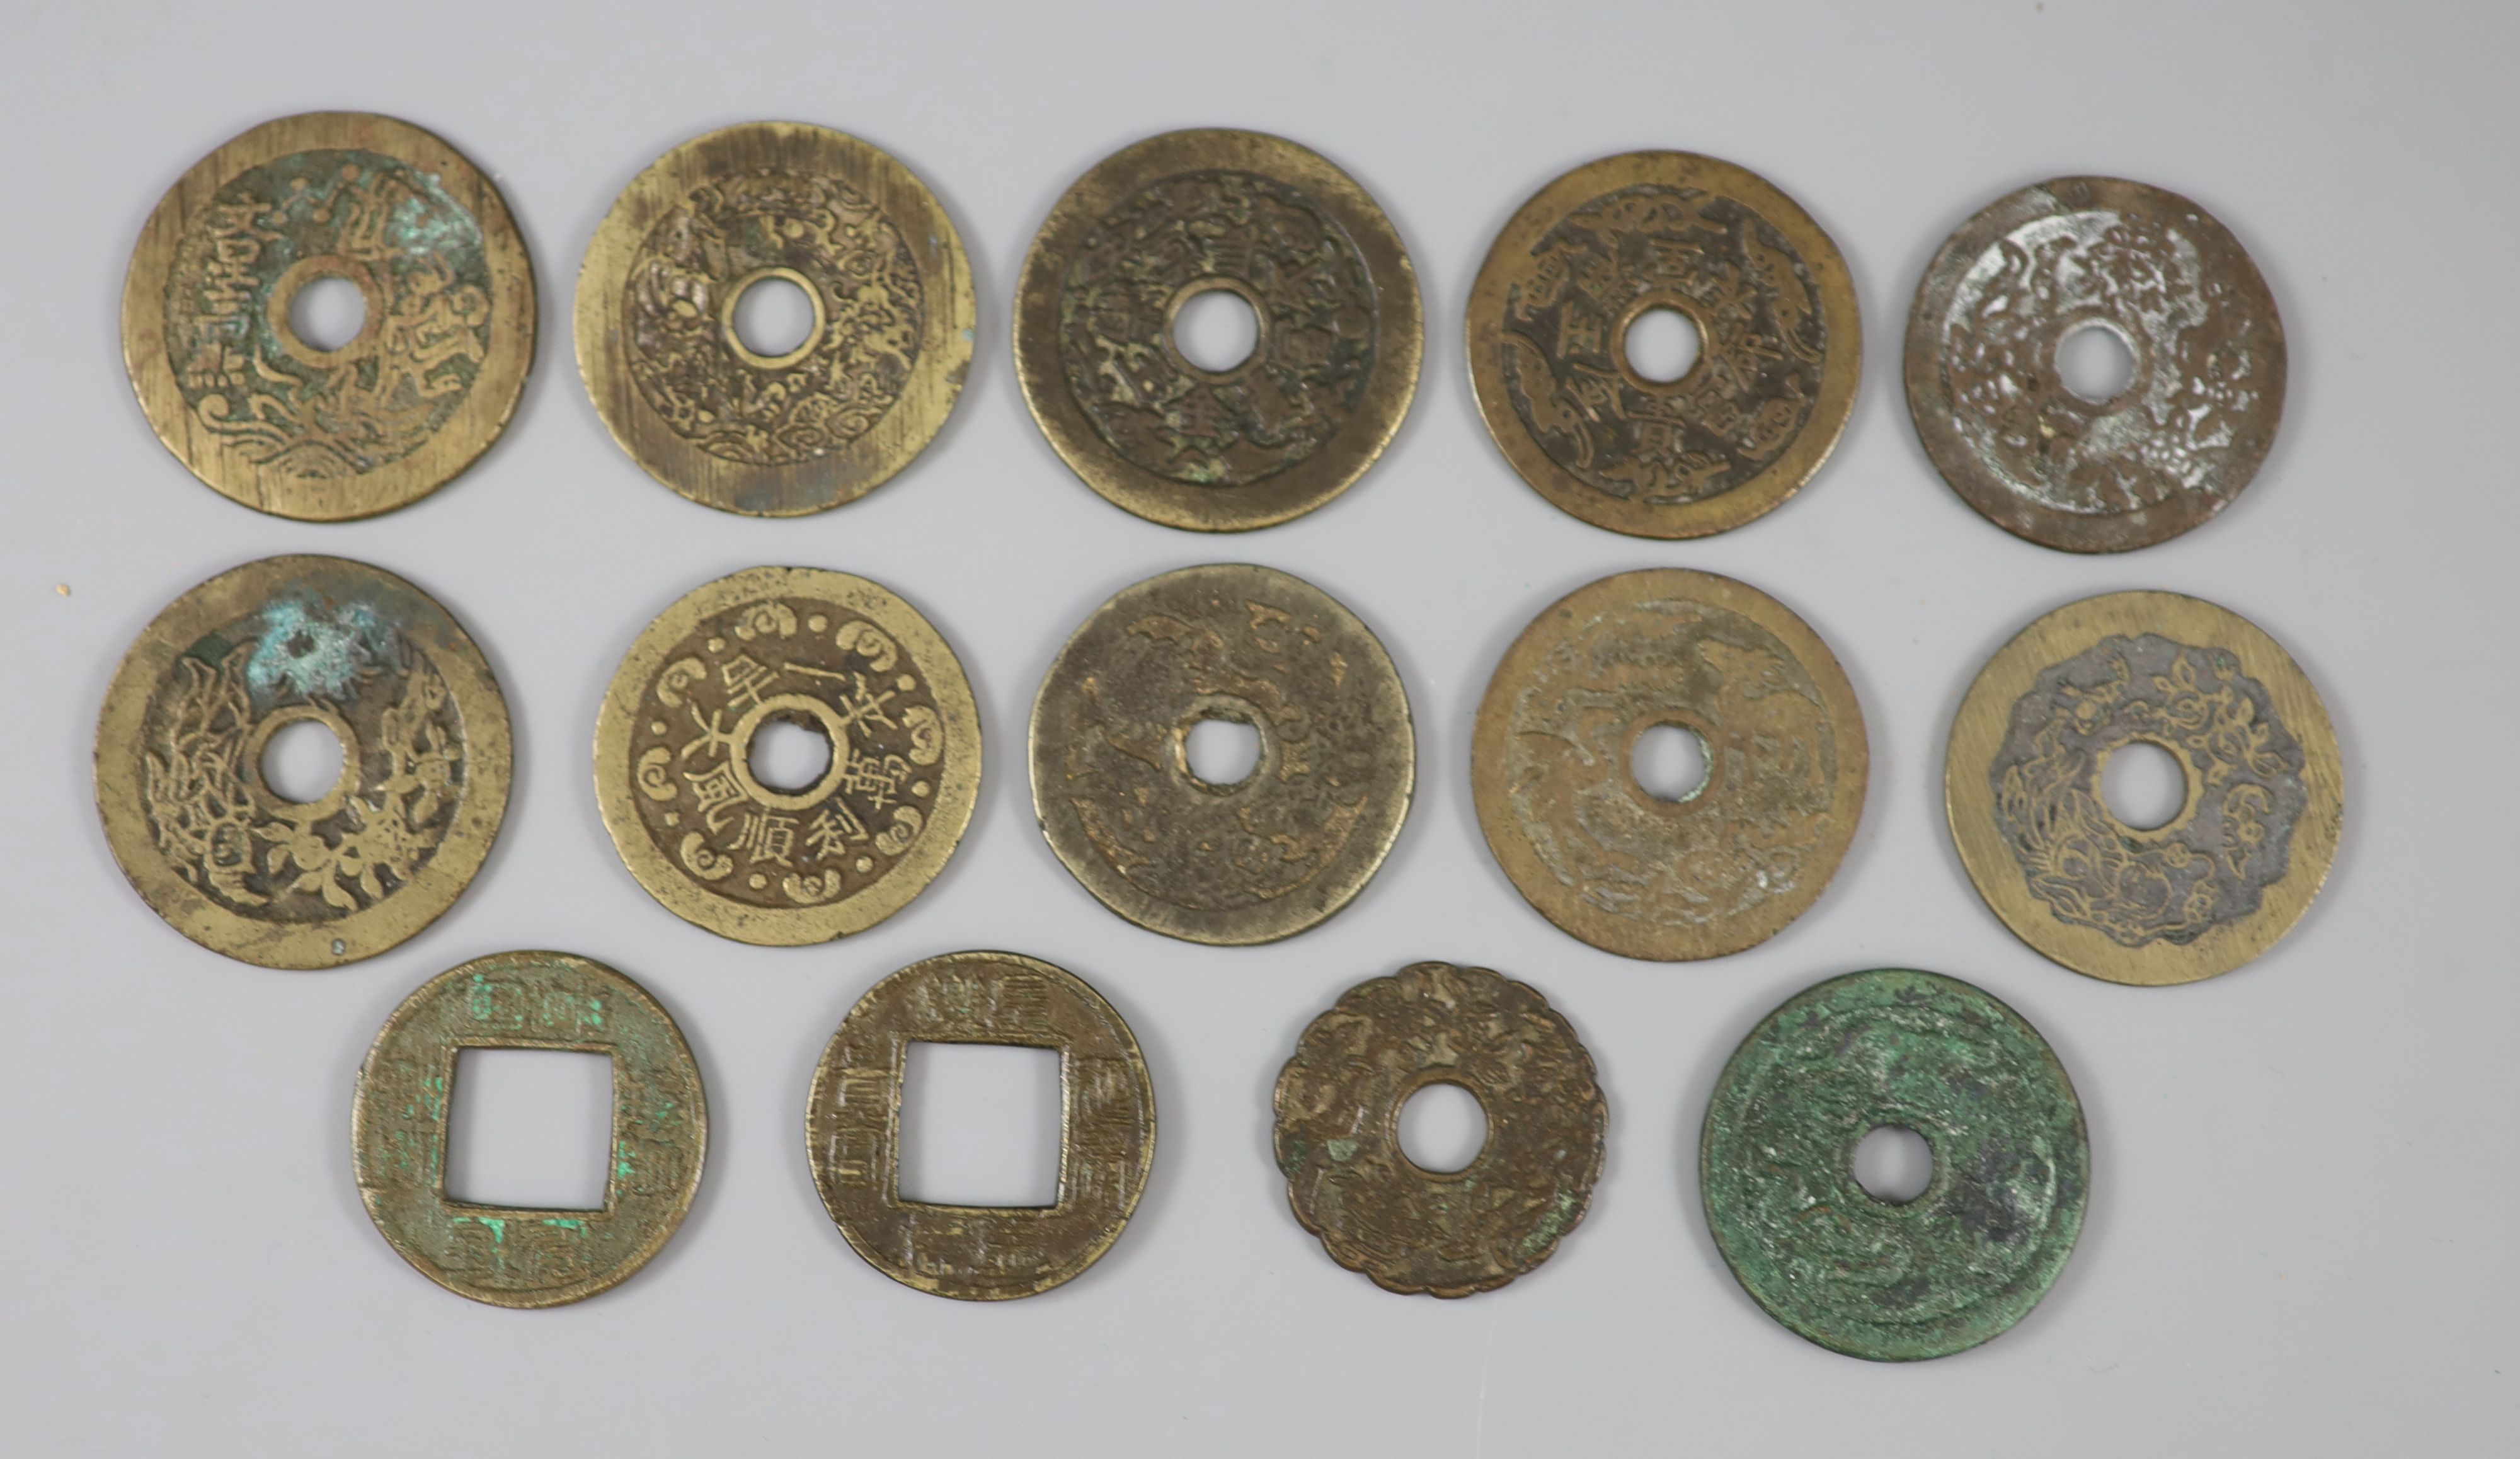 China, 14 cast bronze charms or amulets, Qing dynasty,